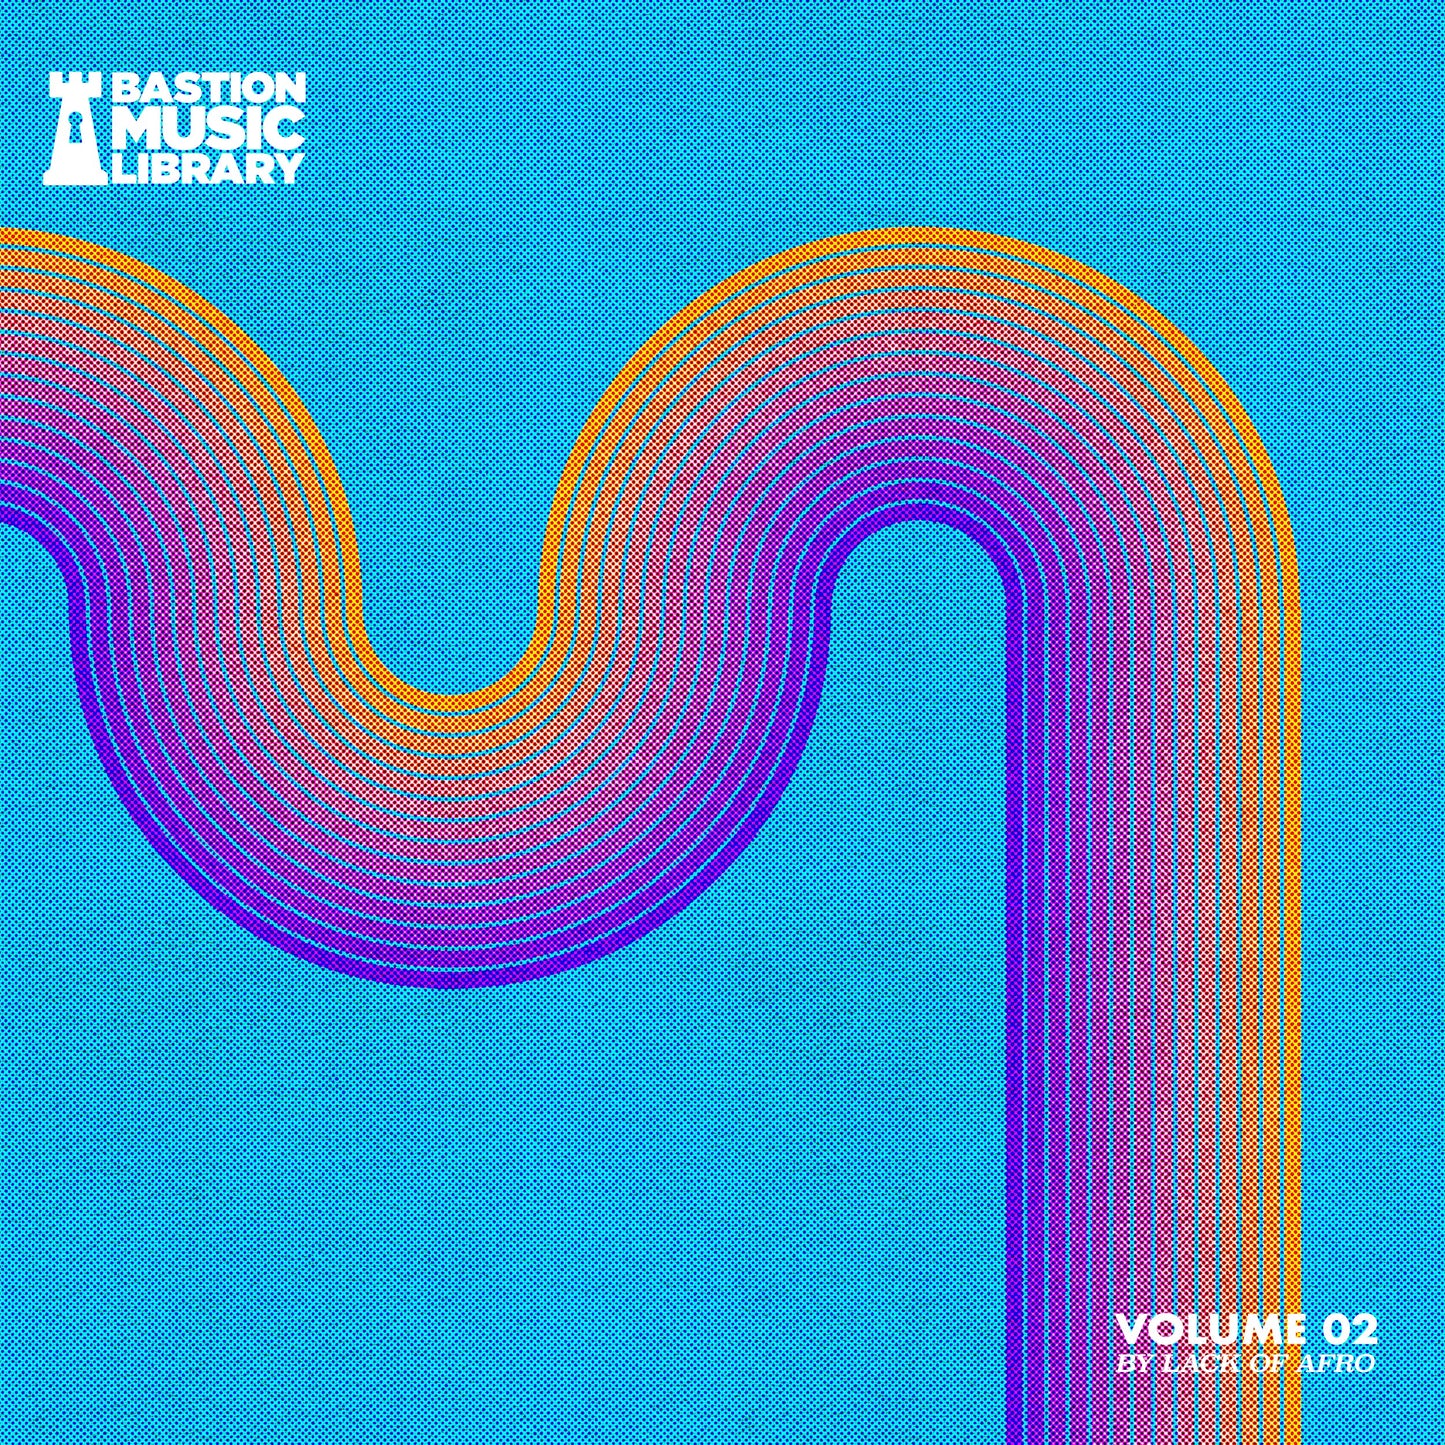 Volume 02 by Lack of Afro